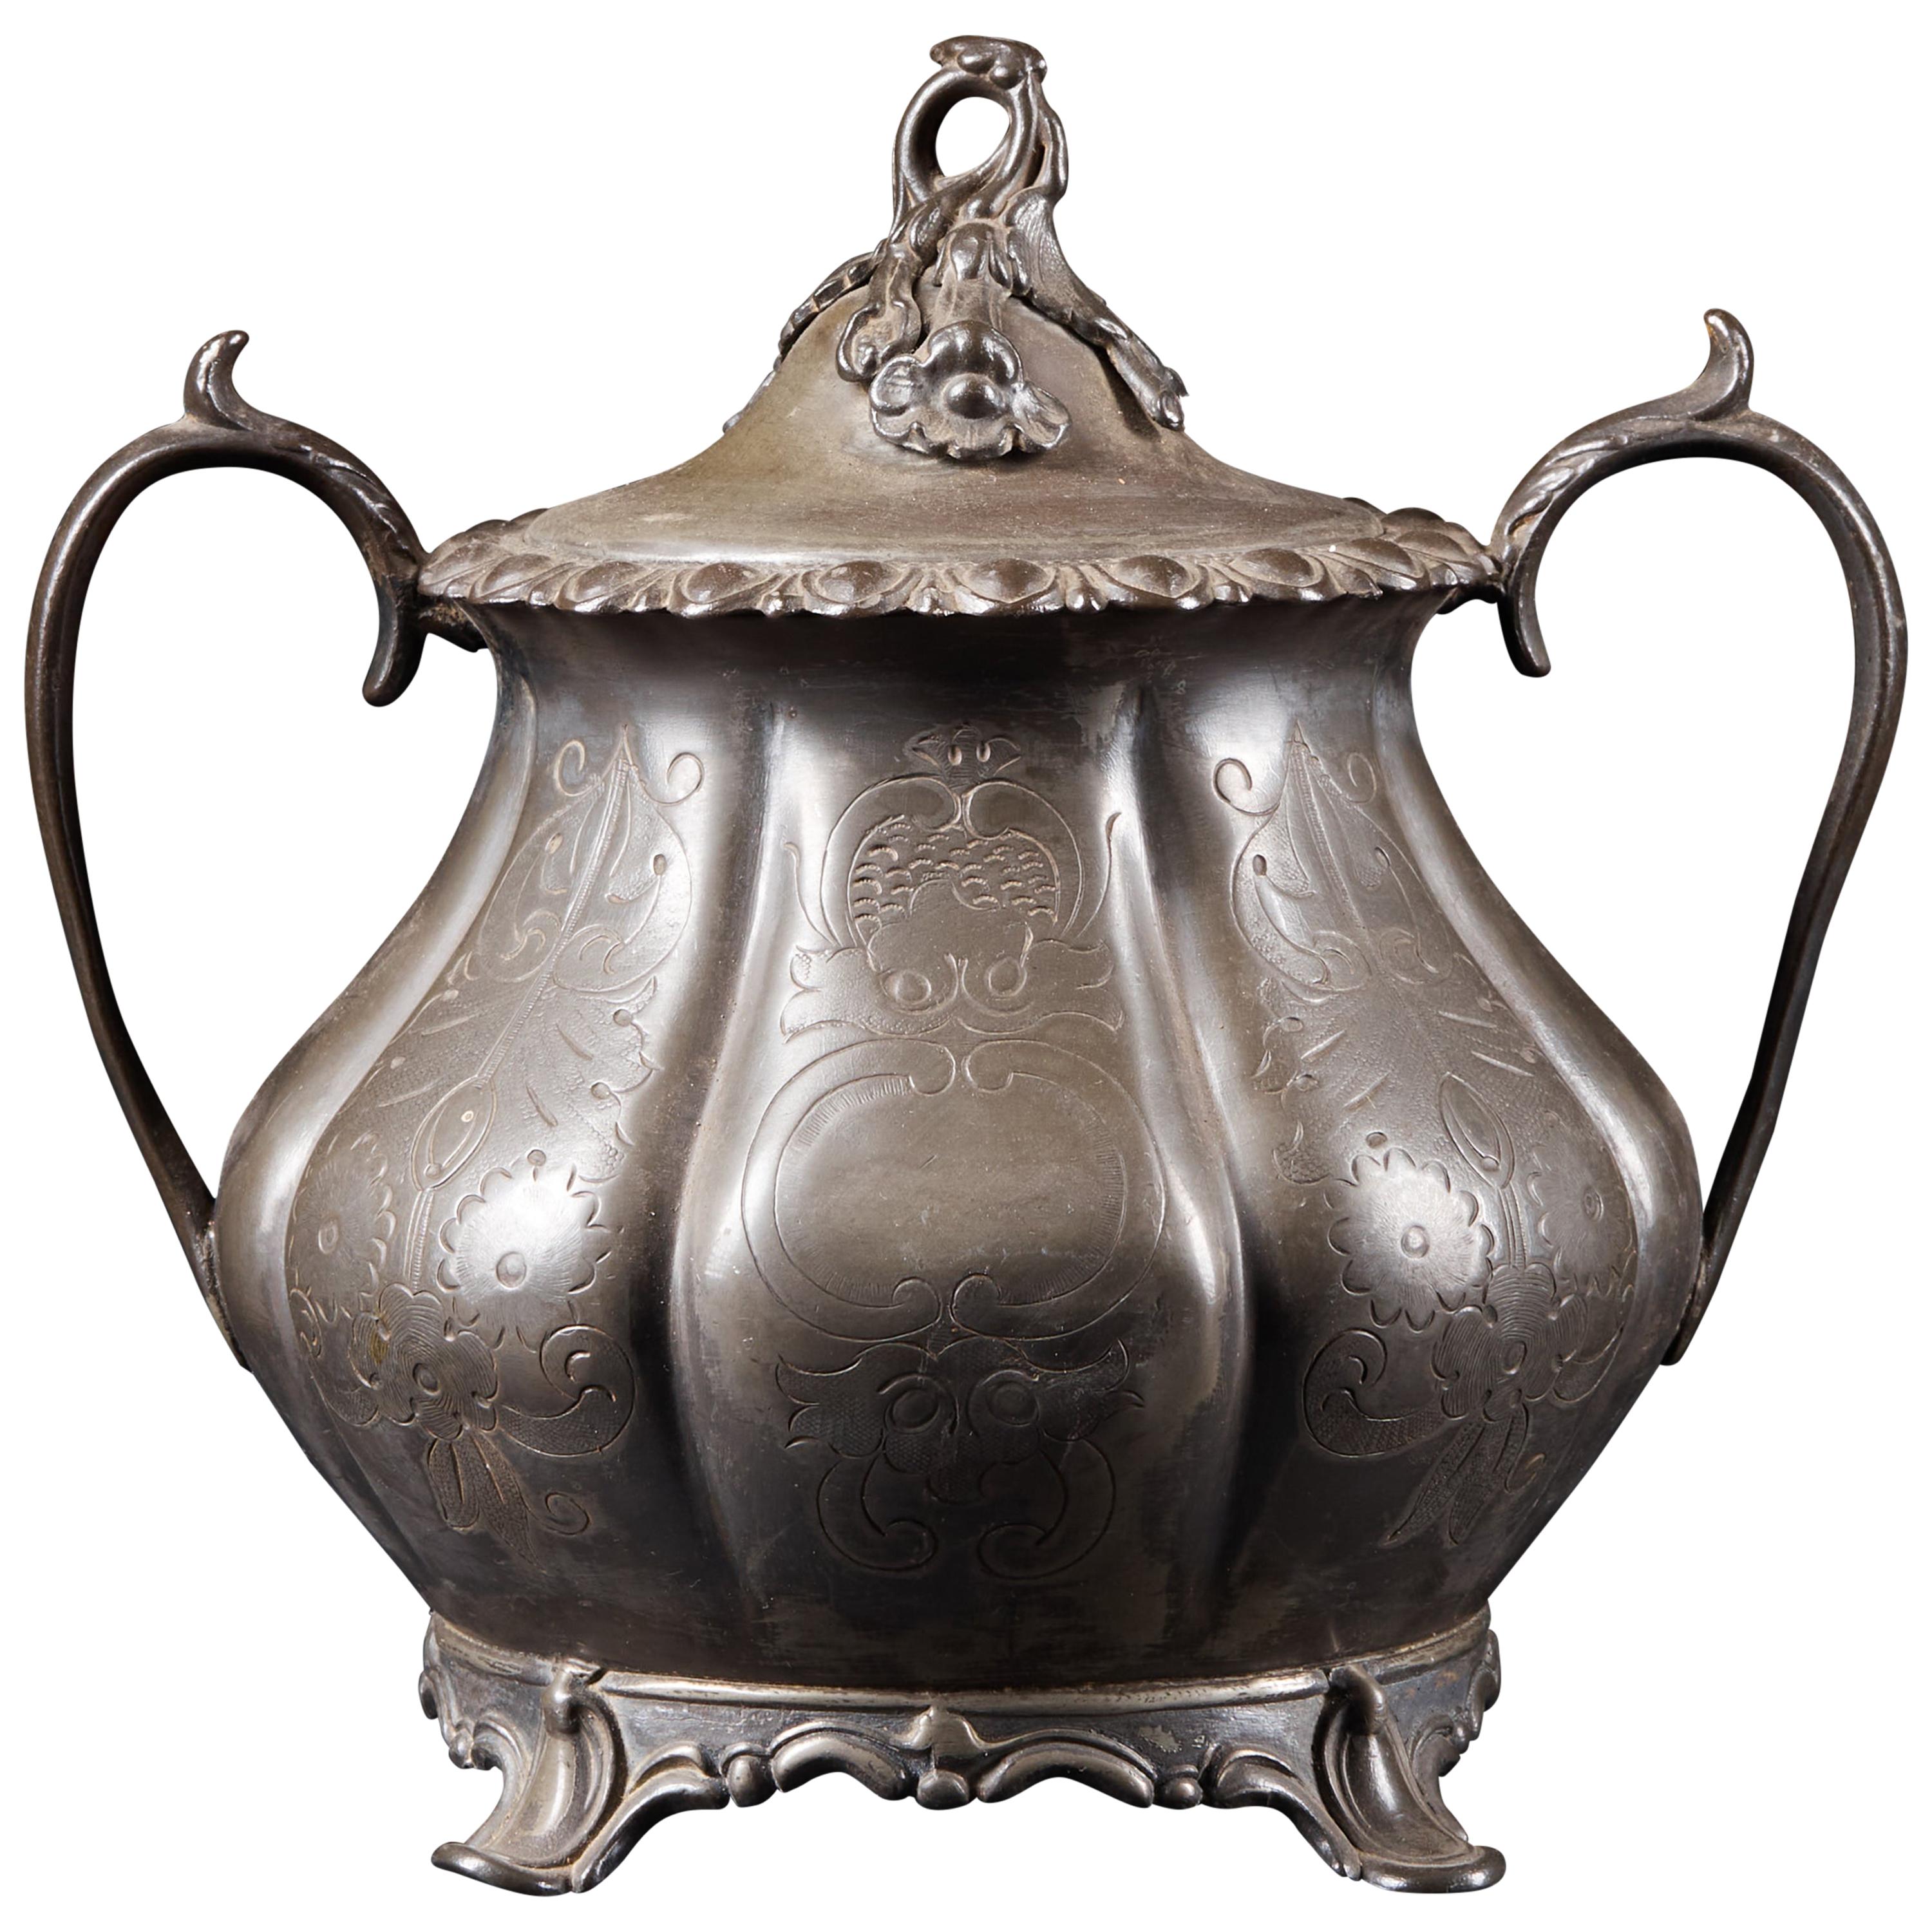 19th Century, Elegant Sugar or Cream Pot with an Embossed Floral Pattern